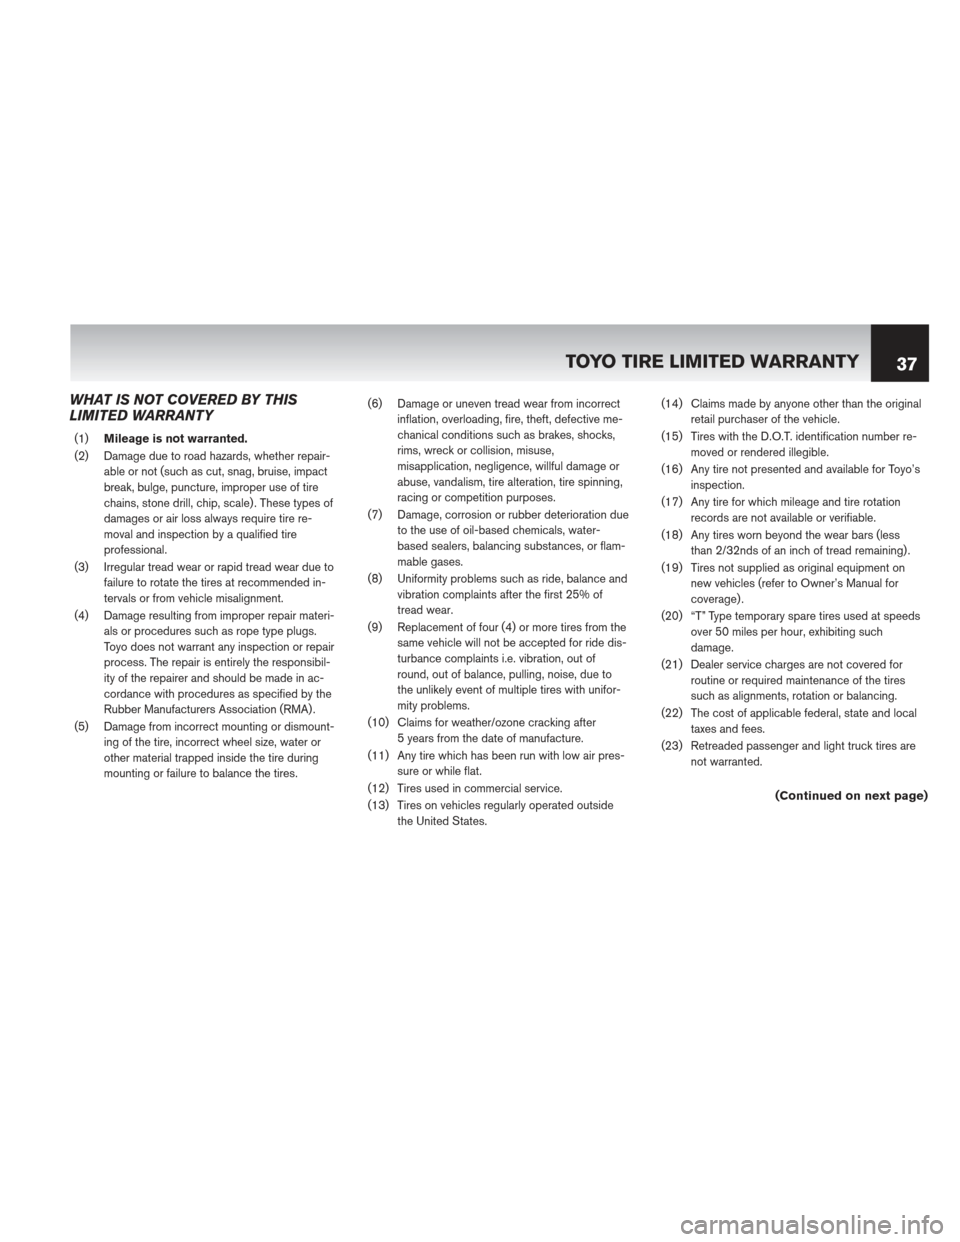 NISSAN XTERRA 2013 N50 / 2.G Warranty Booklet WHAT IS NOT COVERED BY THIS
LIMITED WARRANTY
(1)Mileage is not warranted.
(2) Damage due to road hazards, whether repair- able or not (such as cut, snag, bruise, impact
break, bulge, puncture, imprope